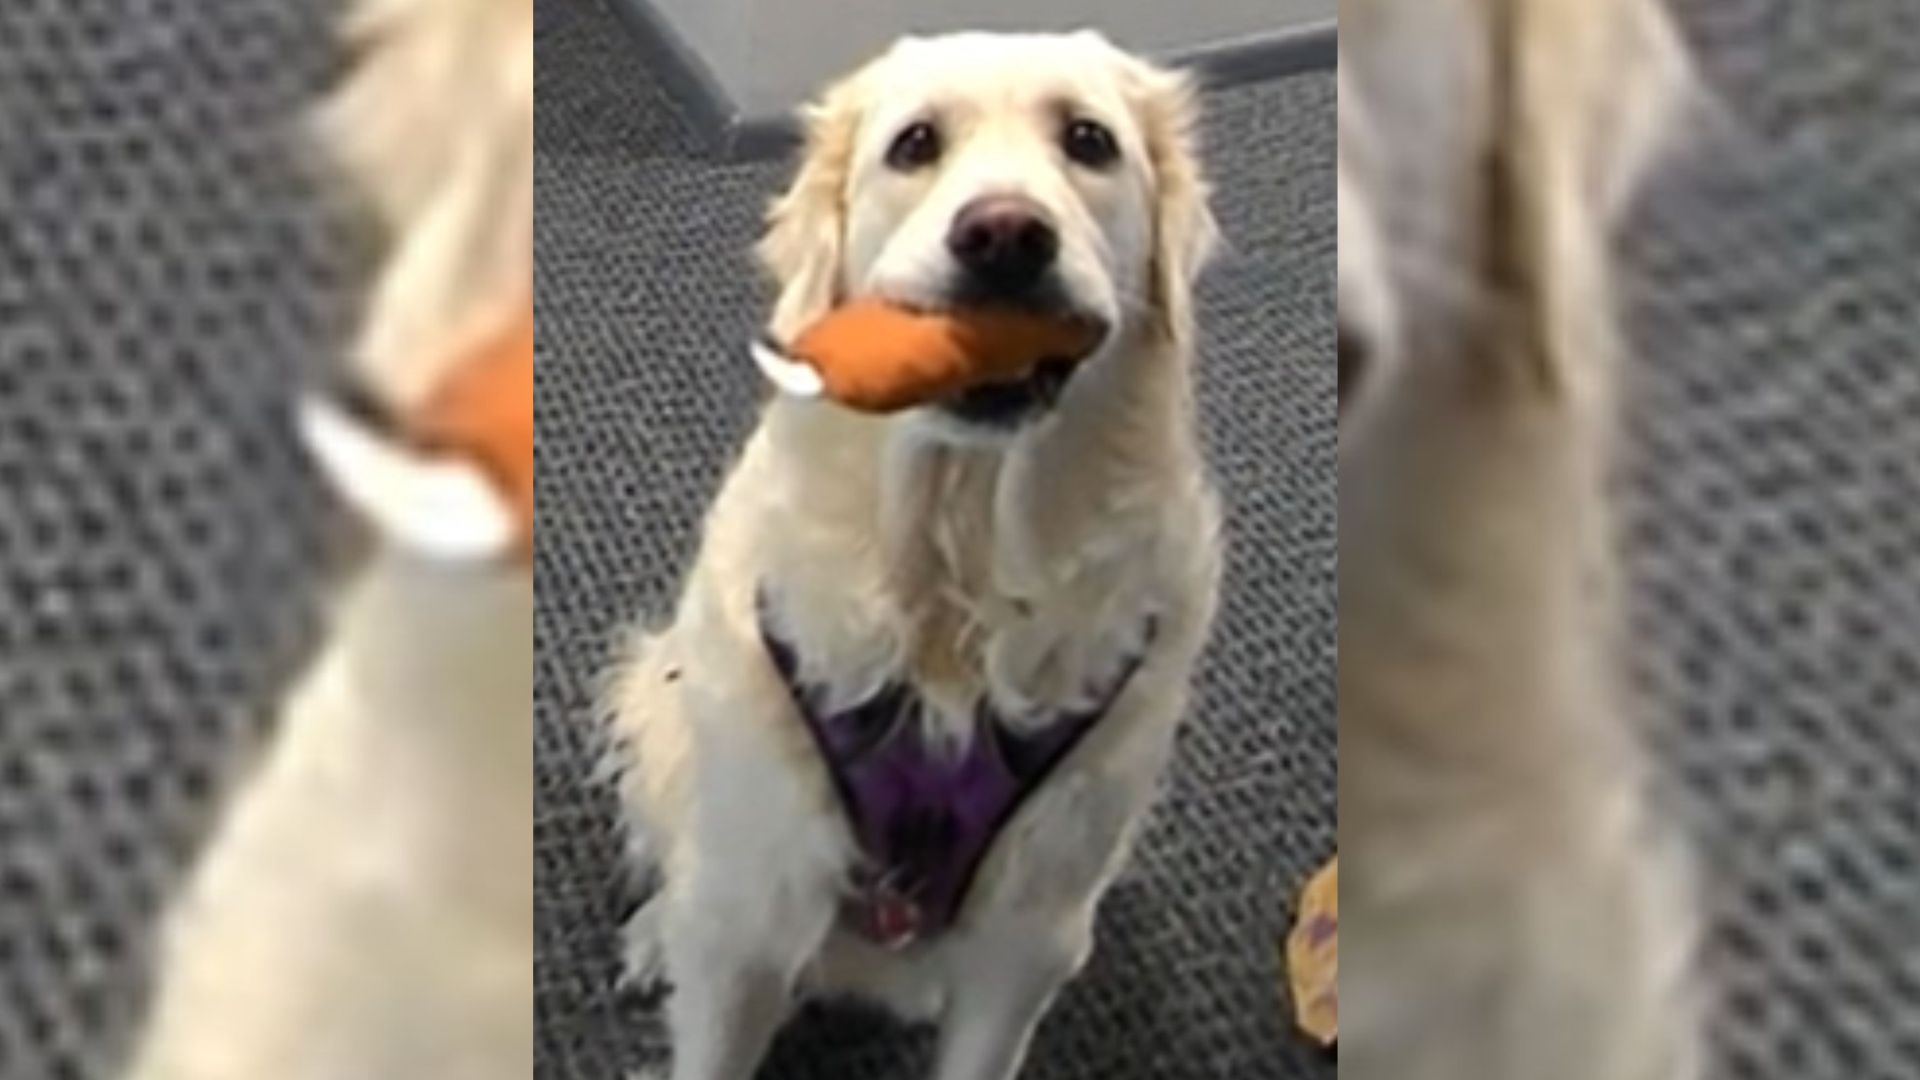 Video Showing A Golden Retriever Patiently Waiting For A Door To Be Opened Went Viral